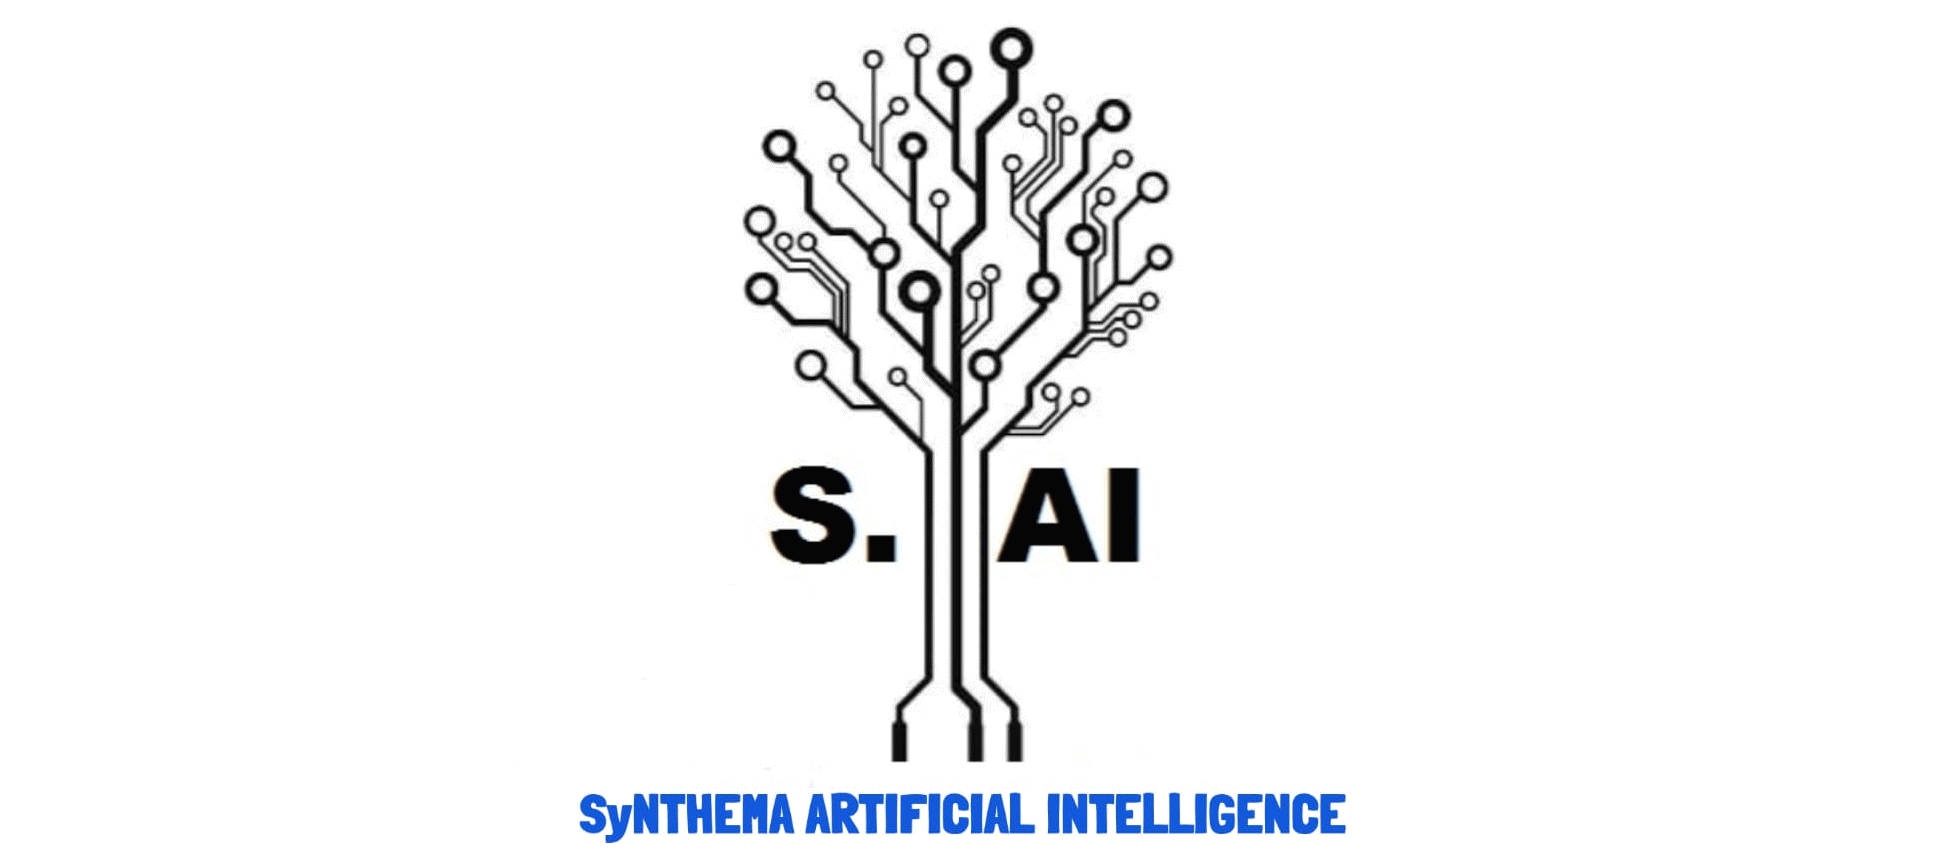 SyNTHEMA Artificial Intelligence